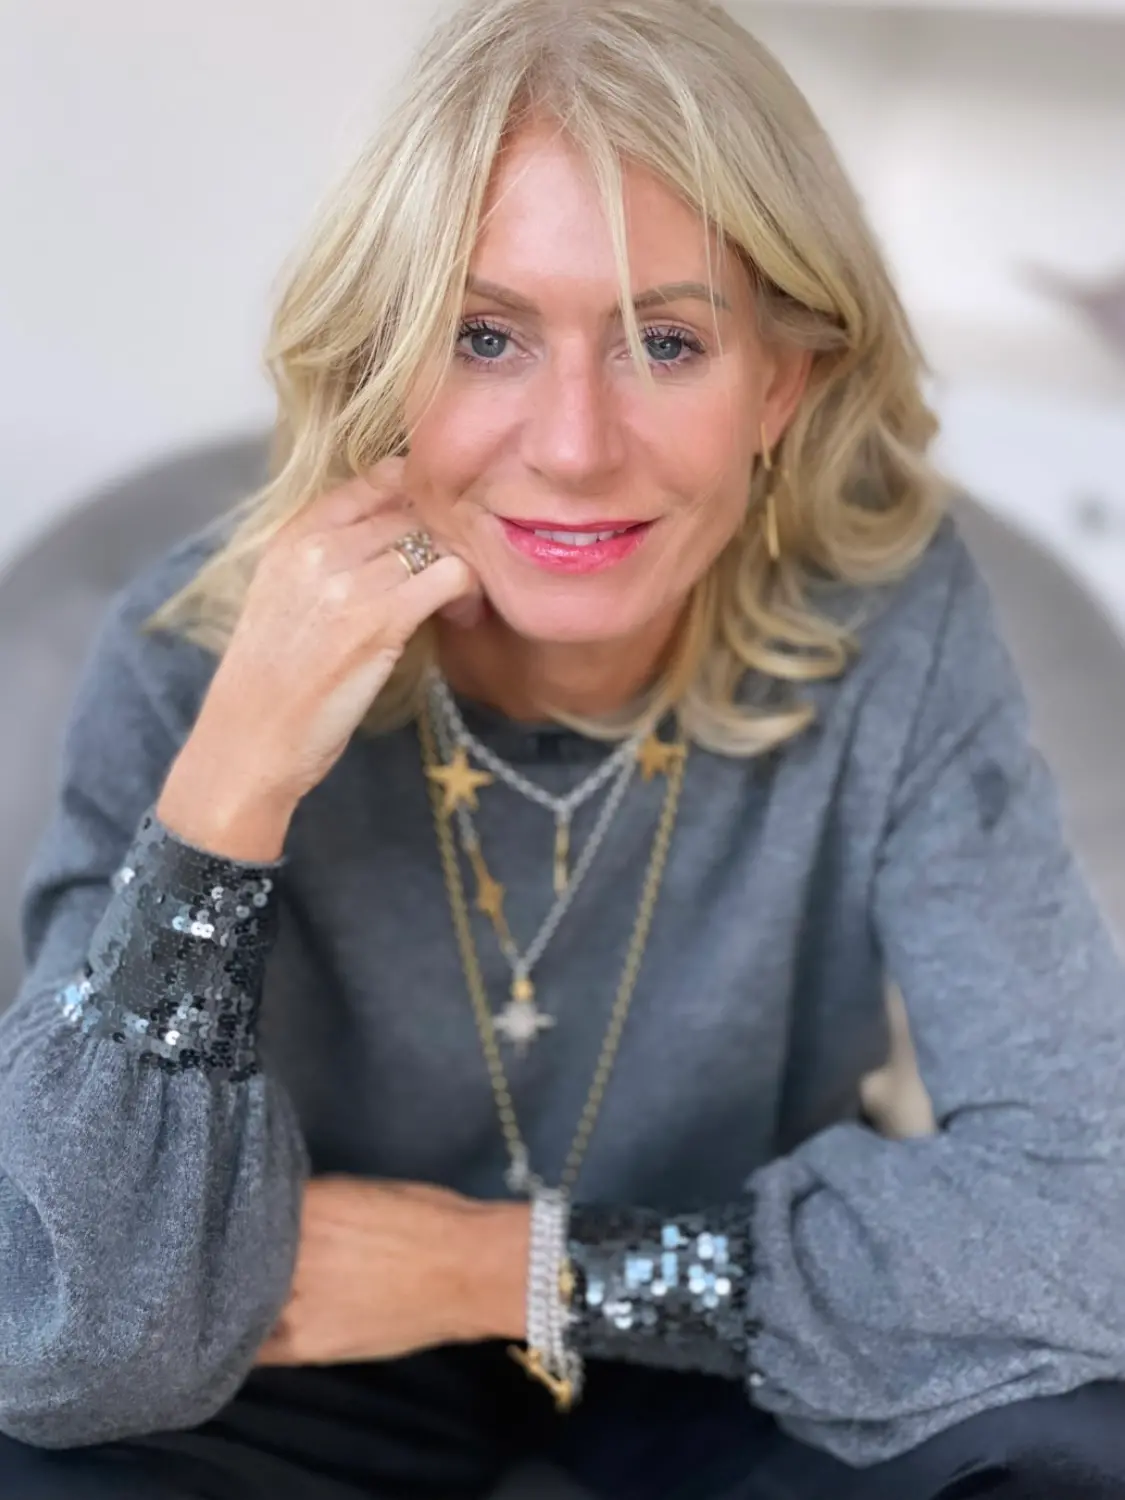 Jewellery designer Amy Elson wearing layered silver necklaces